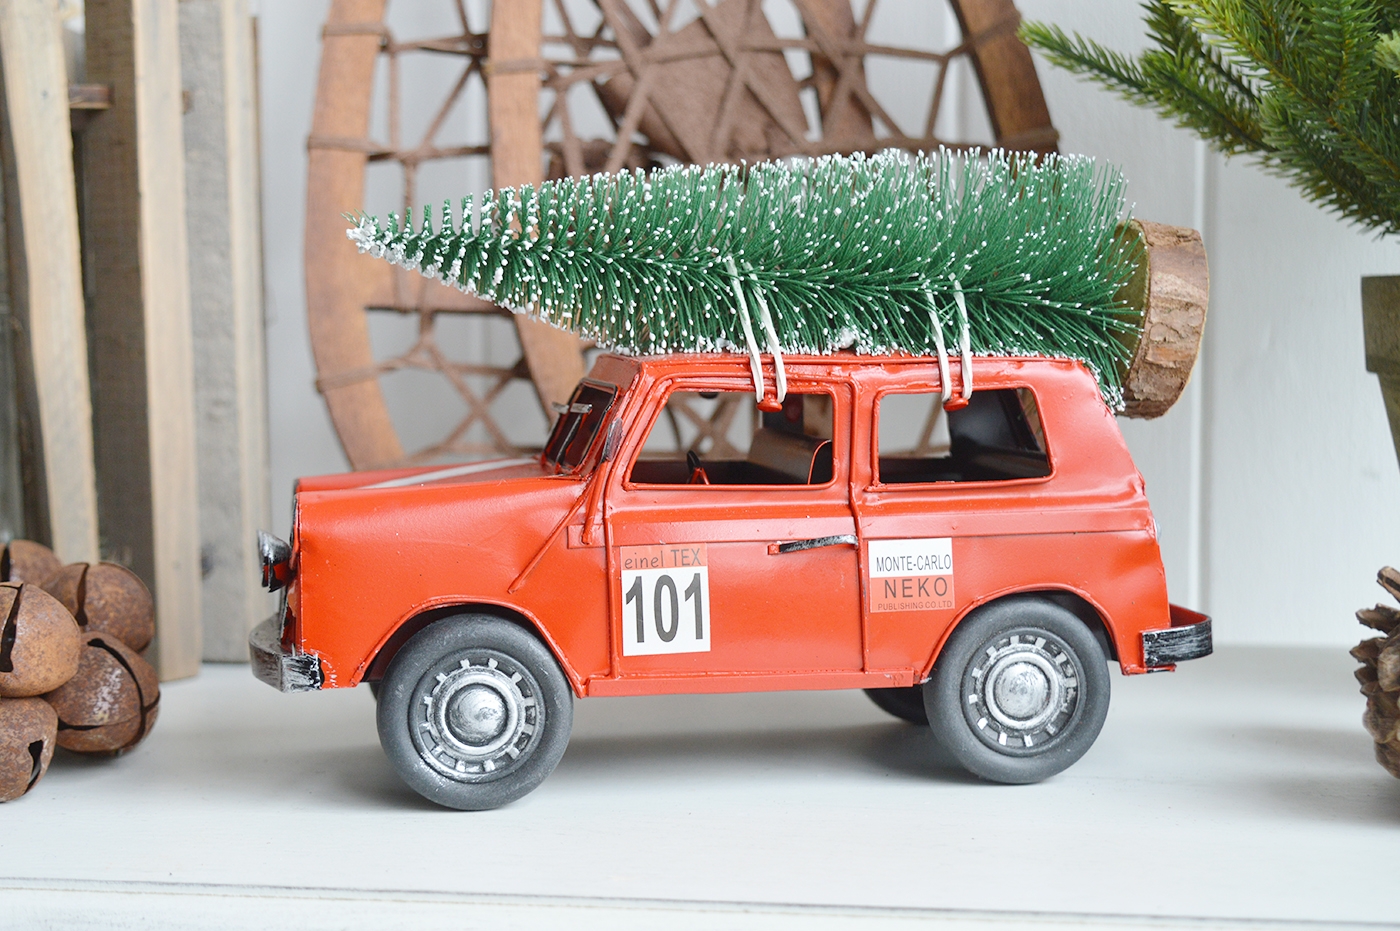 New England style Christmas Decor for cottage, farmhouse, coastal, country and city homes and interiors. VIntage Red Car with Christmas Tree - New England style Christmas Decor